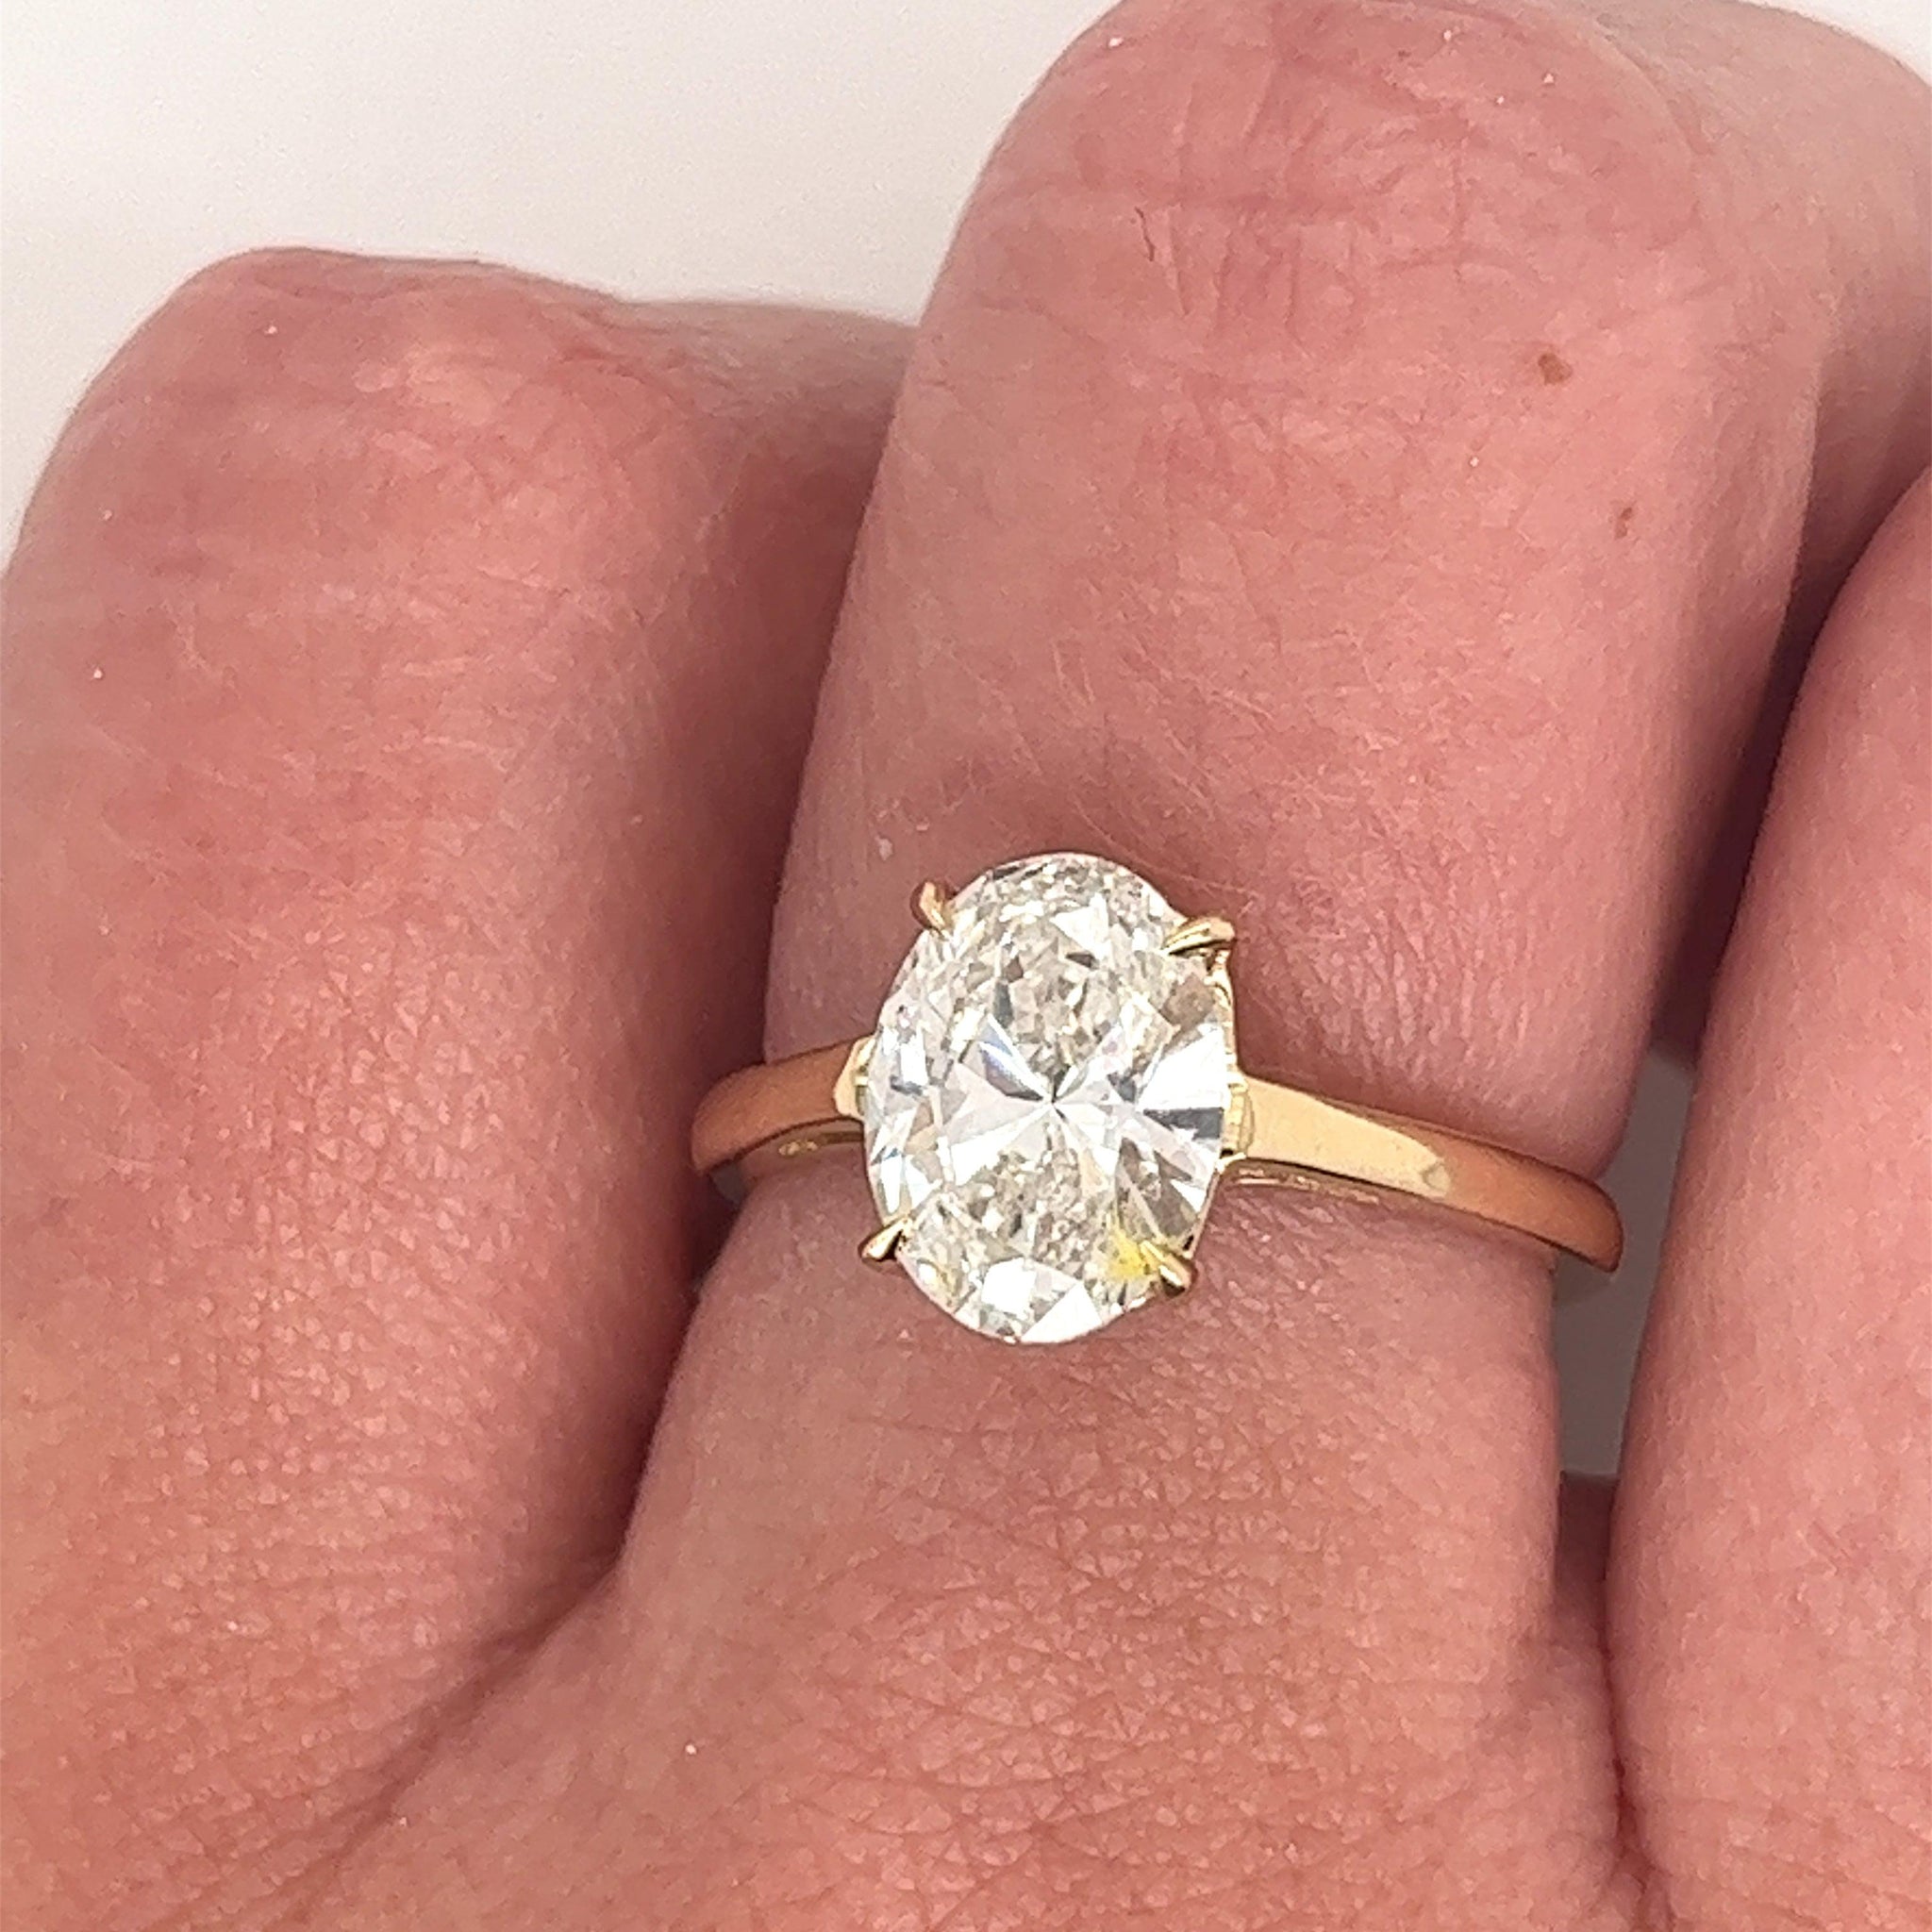 2.06 Carat Oval Cut Lab Grown Diamond CVD Ring in 14K Yellow Gold Low Profile Setting-Engagement Ring-ASSAY